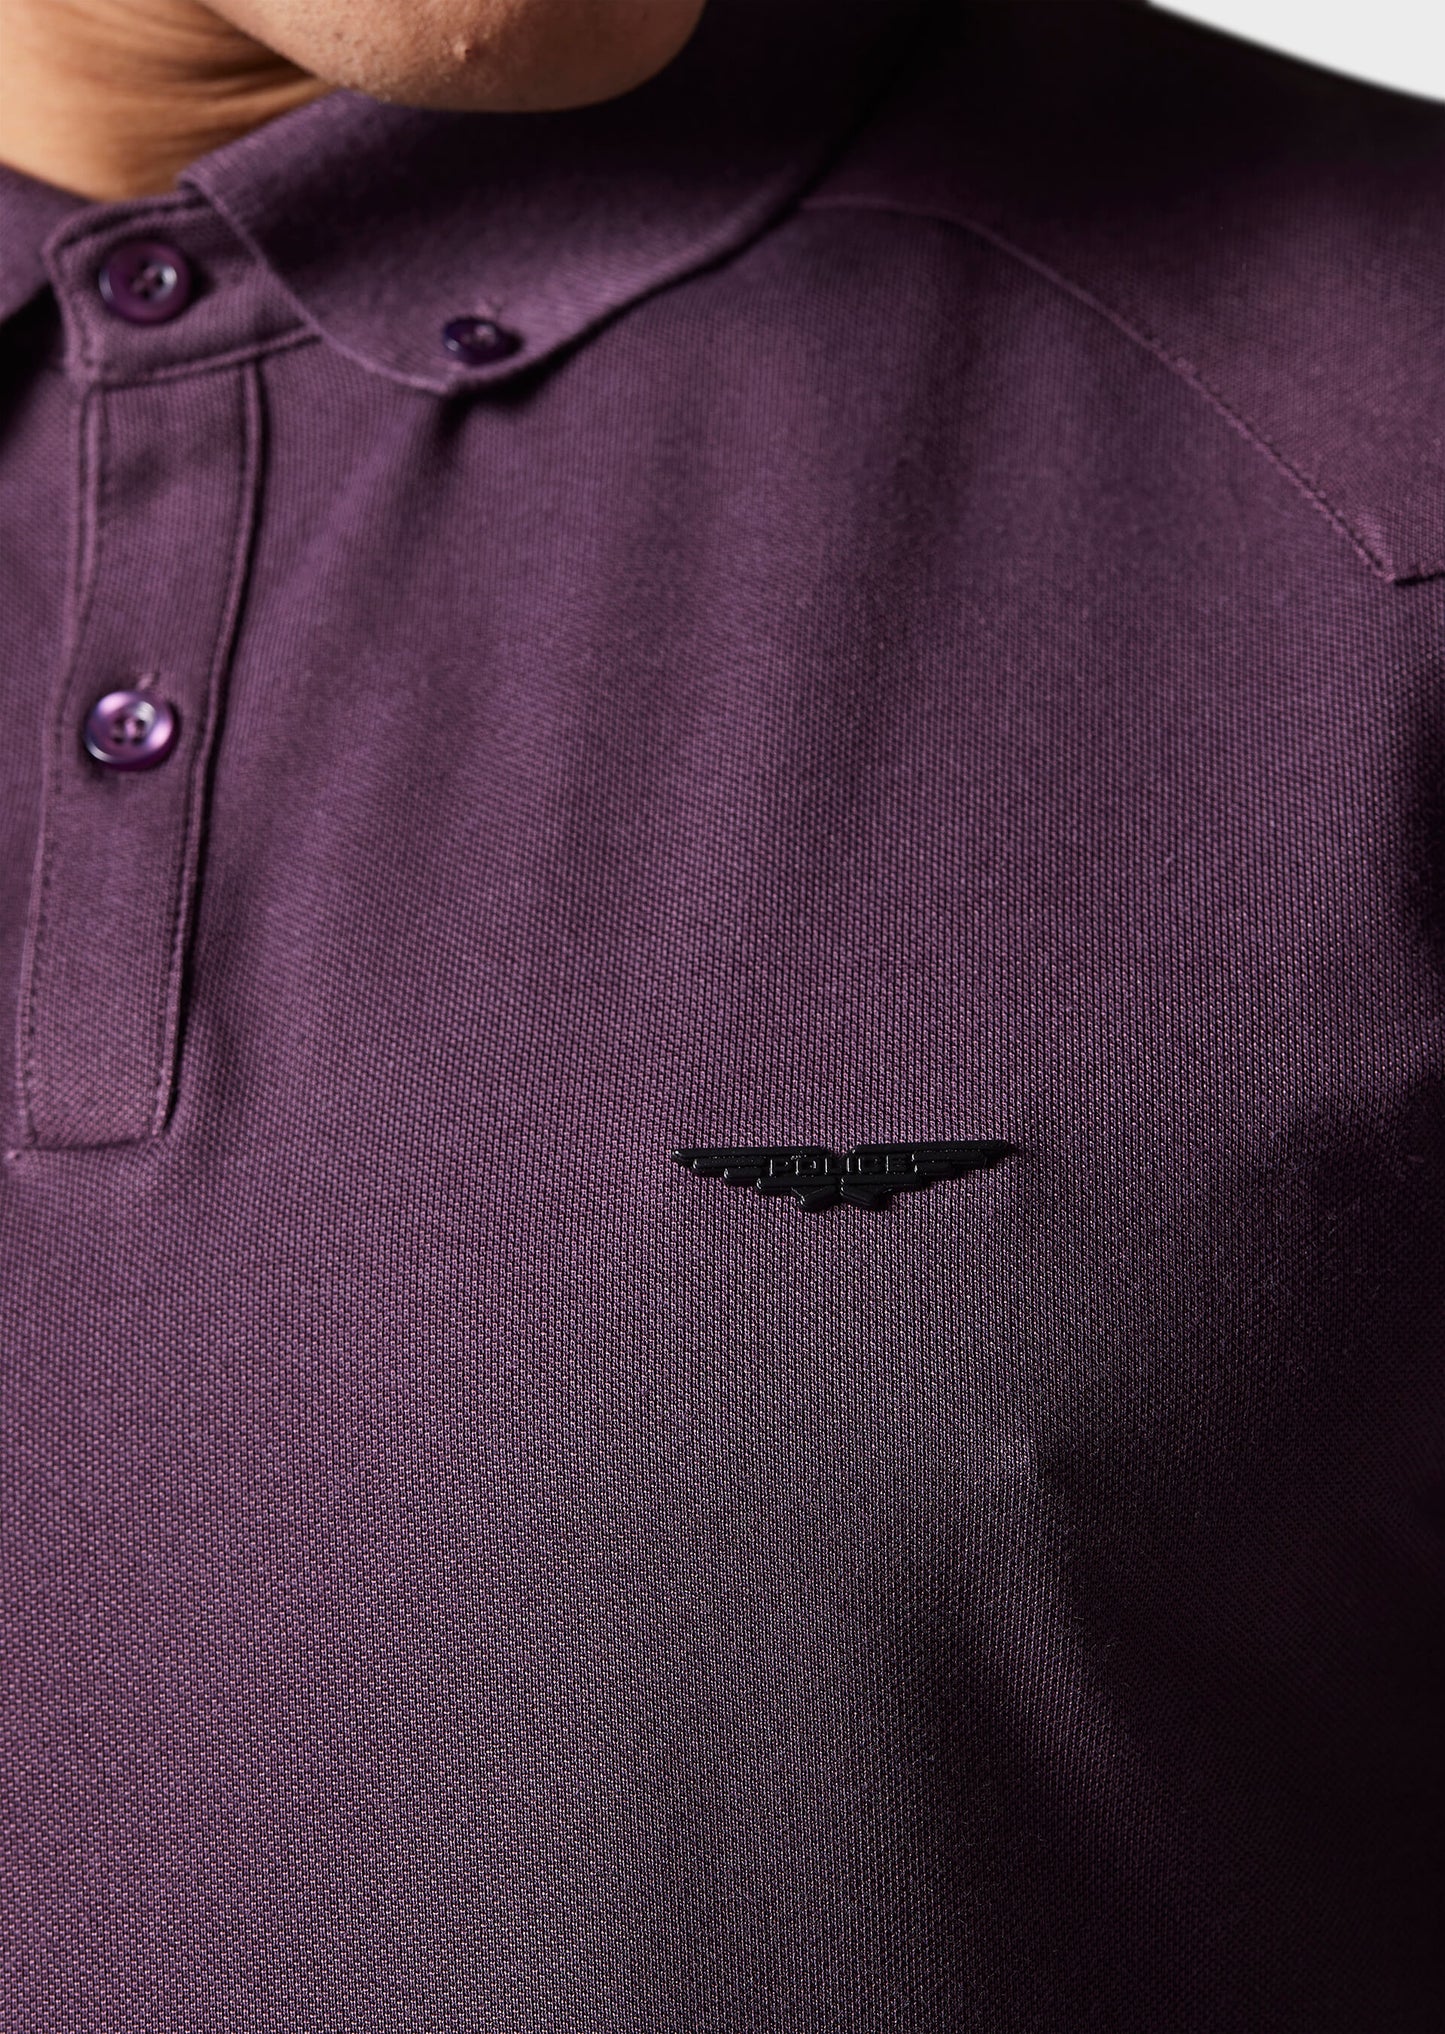 Pesca Crushed Berry Polo